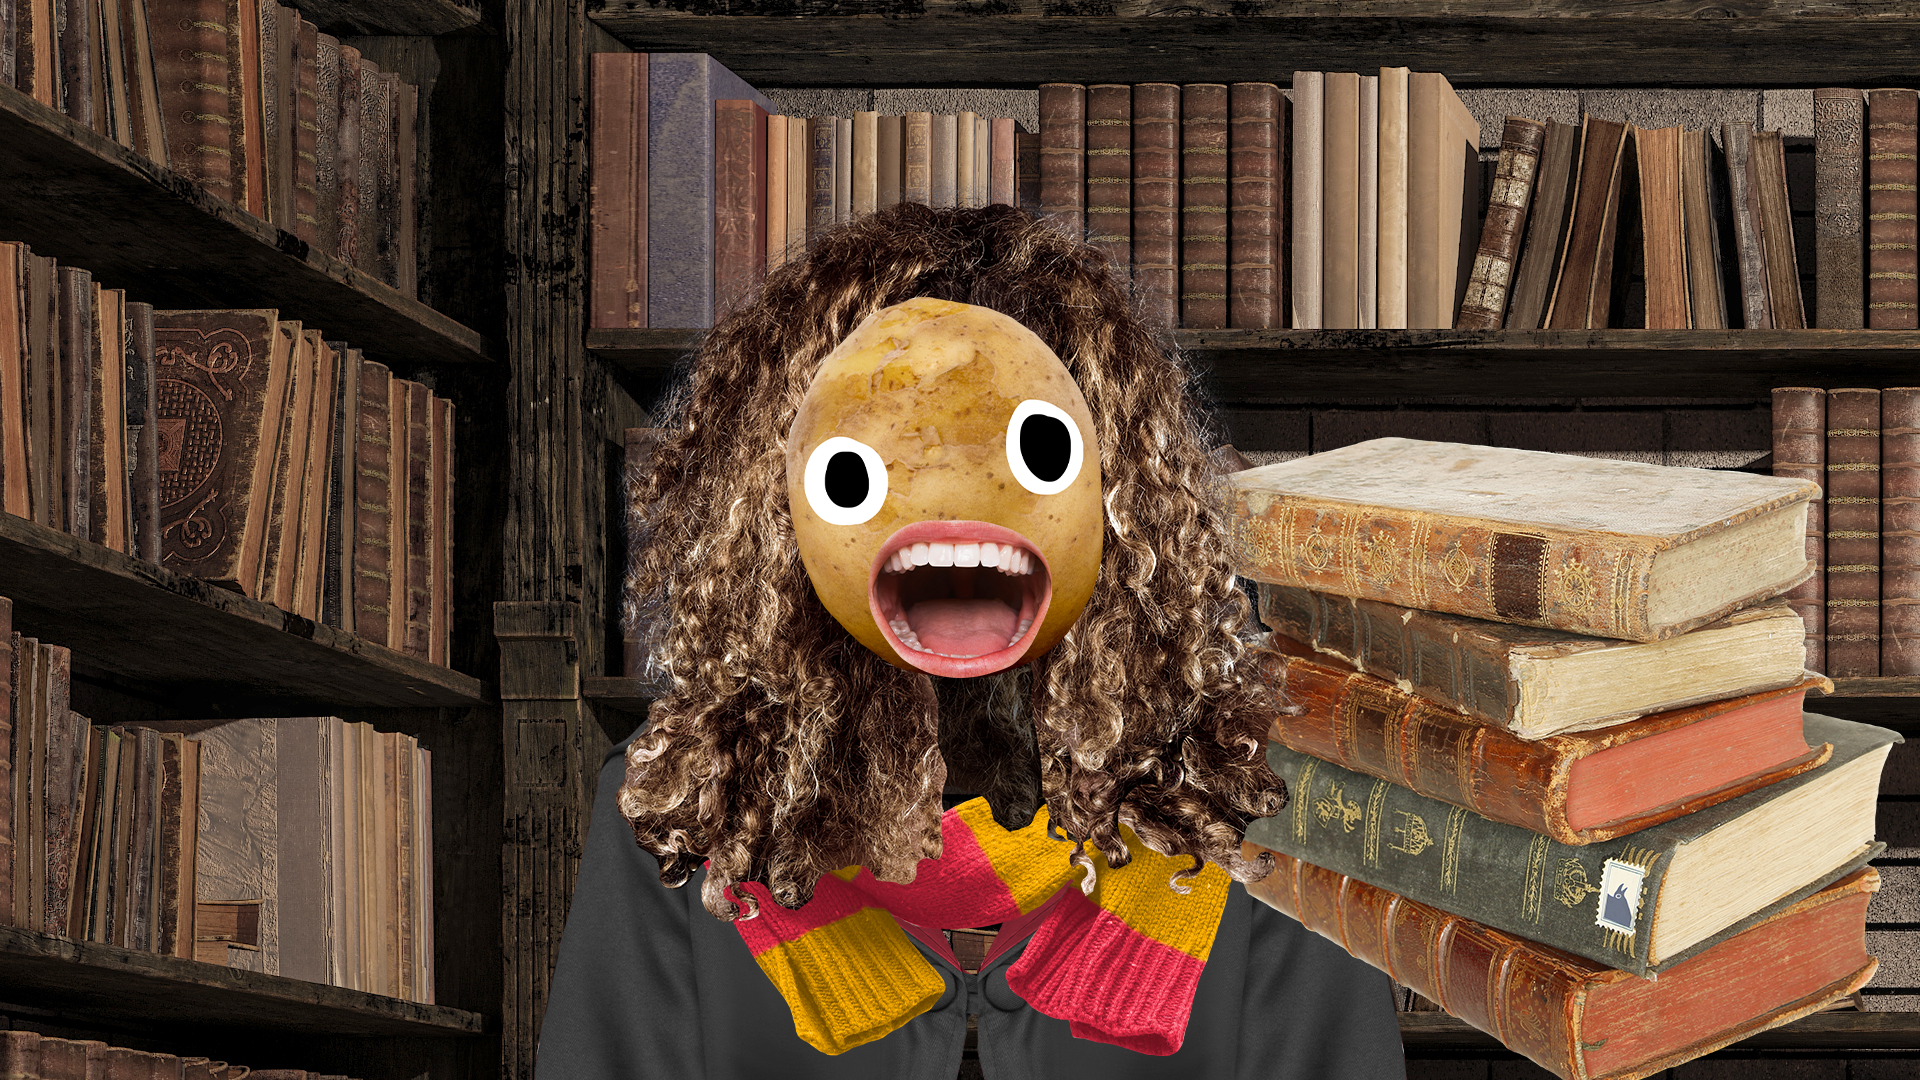 Hermione with books in library